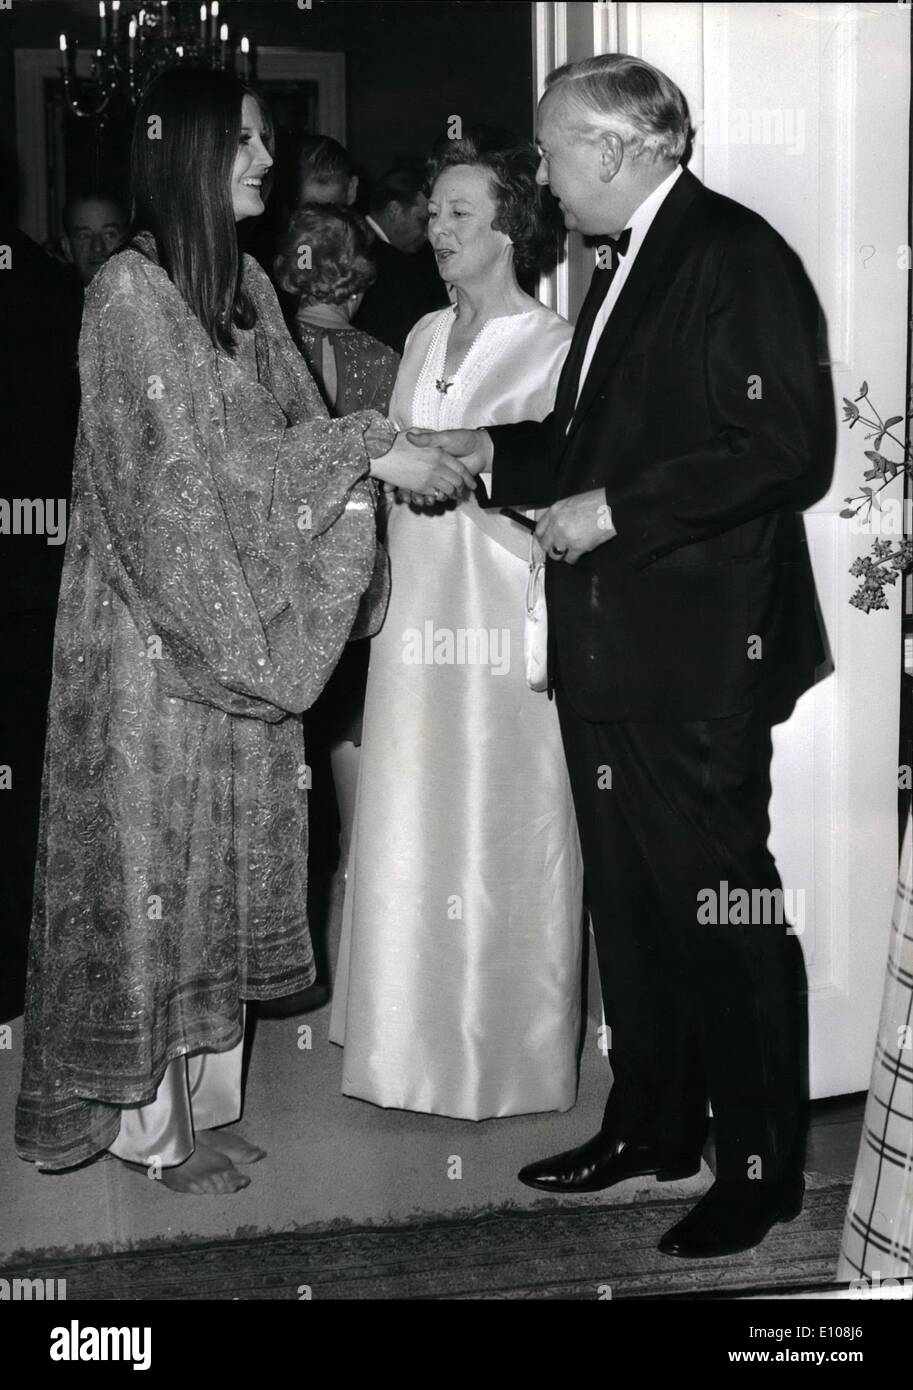 Mar. 03, 1970 - Sandie Shaw meets the Premiere: Pop singer Sandie Shaw, barefooted despite the suspicious occasion, is greeted by Prime Minister Mr. Harold Wilson and his wife, Mary, at a reception at No. 10, Downing Street last night, given in honour of Herr Willy Brandt, the West German Chancellor. Stock Photo